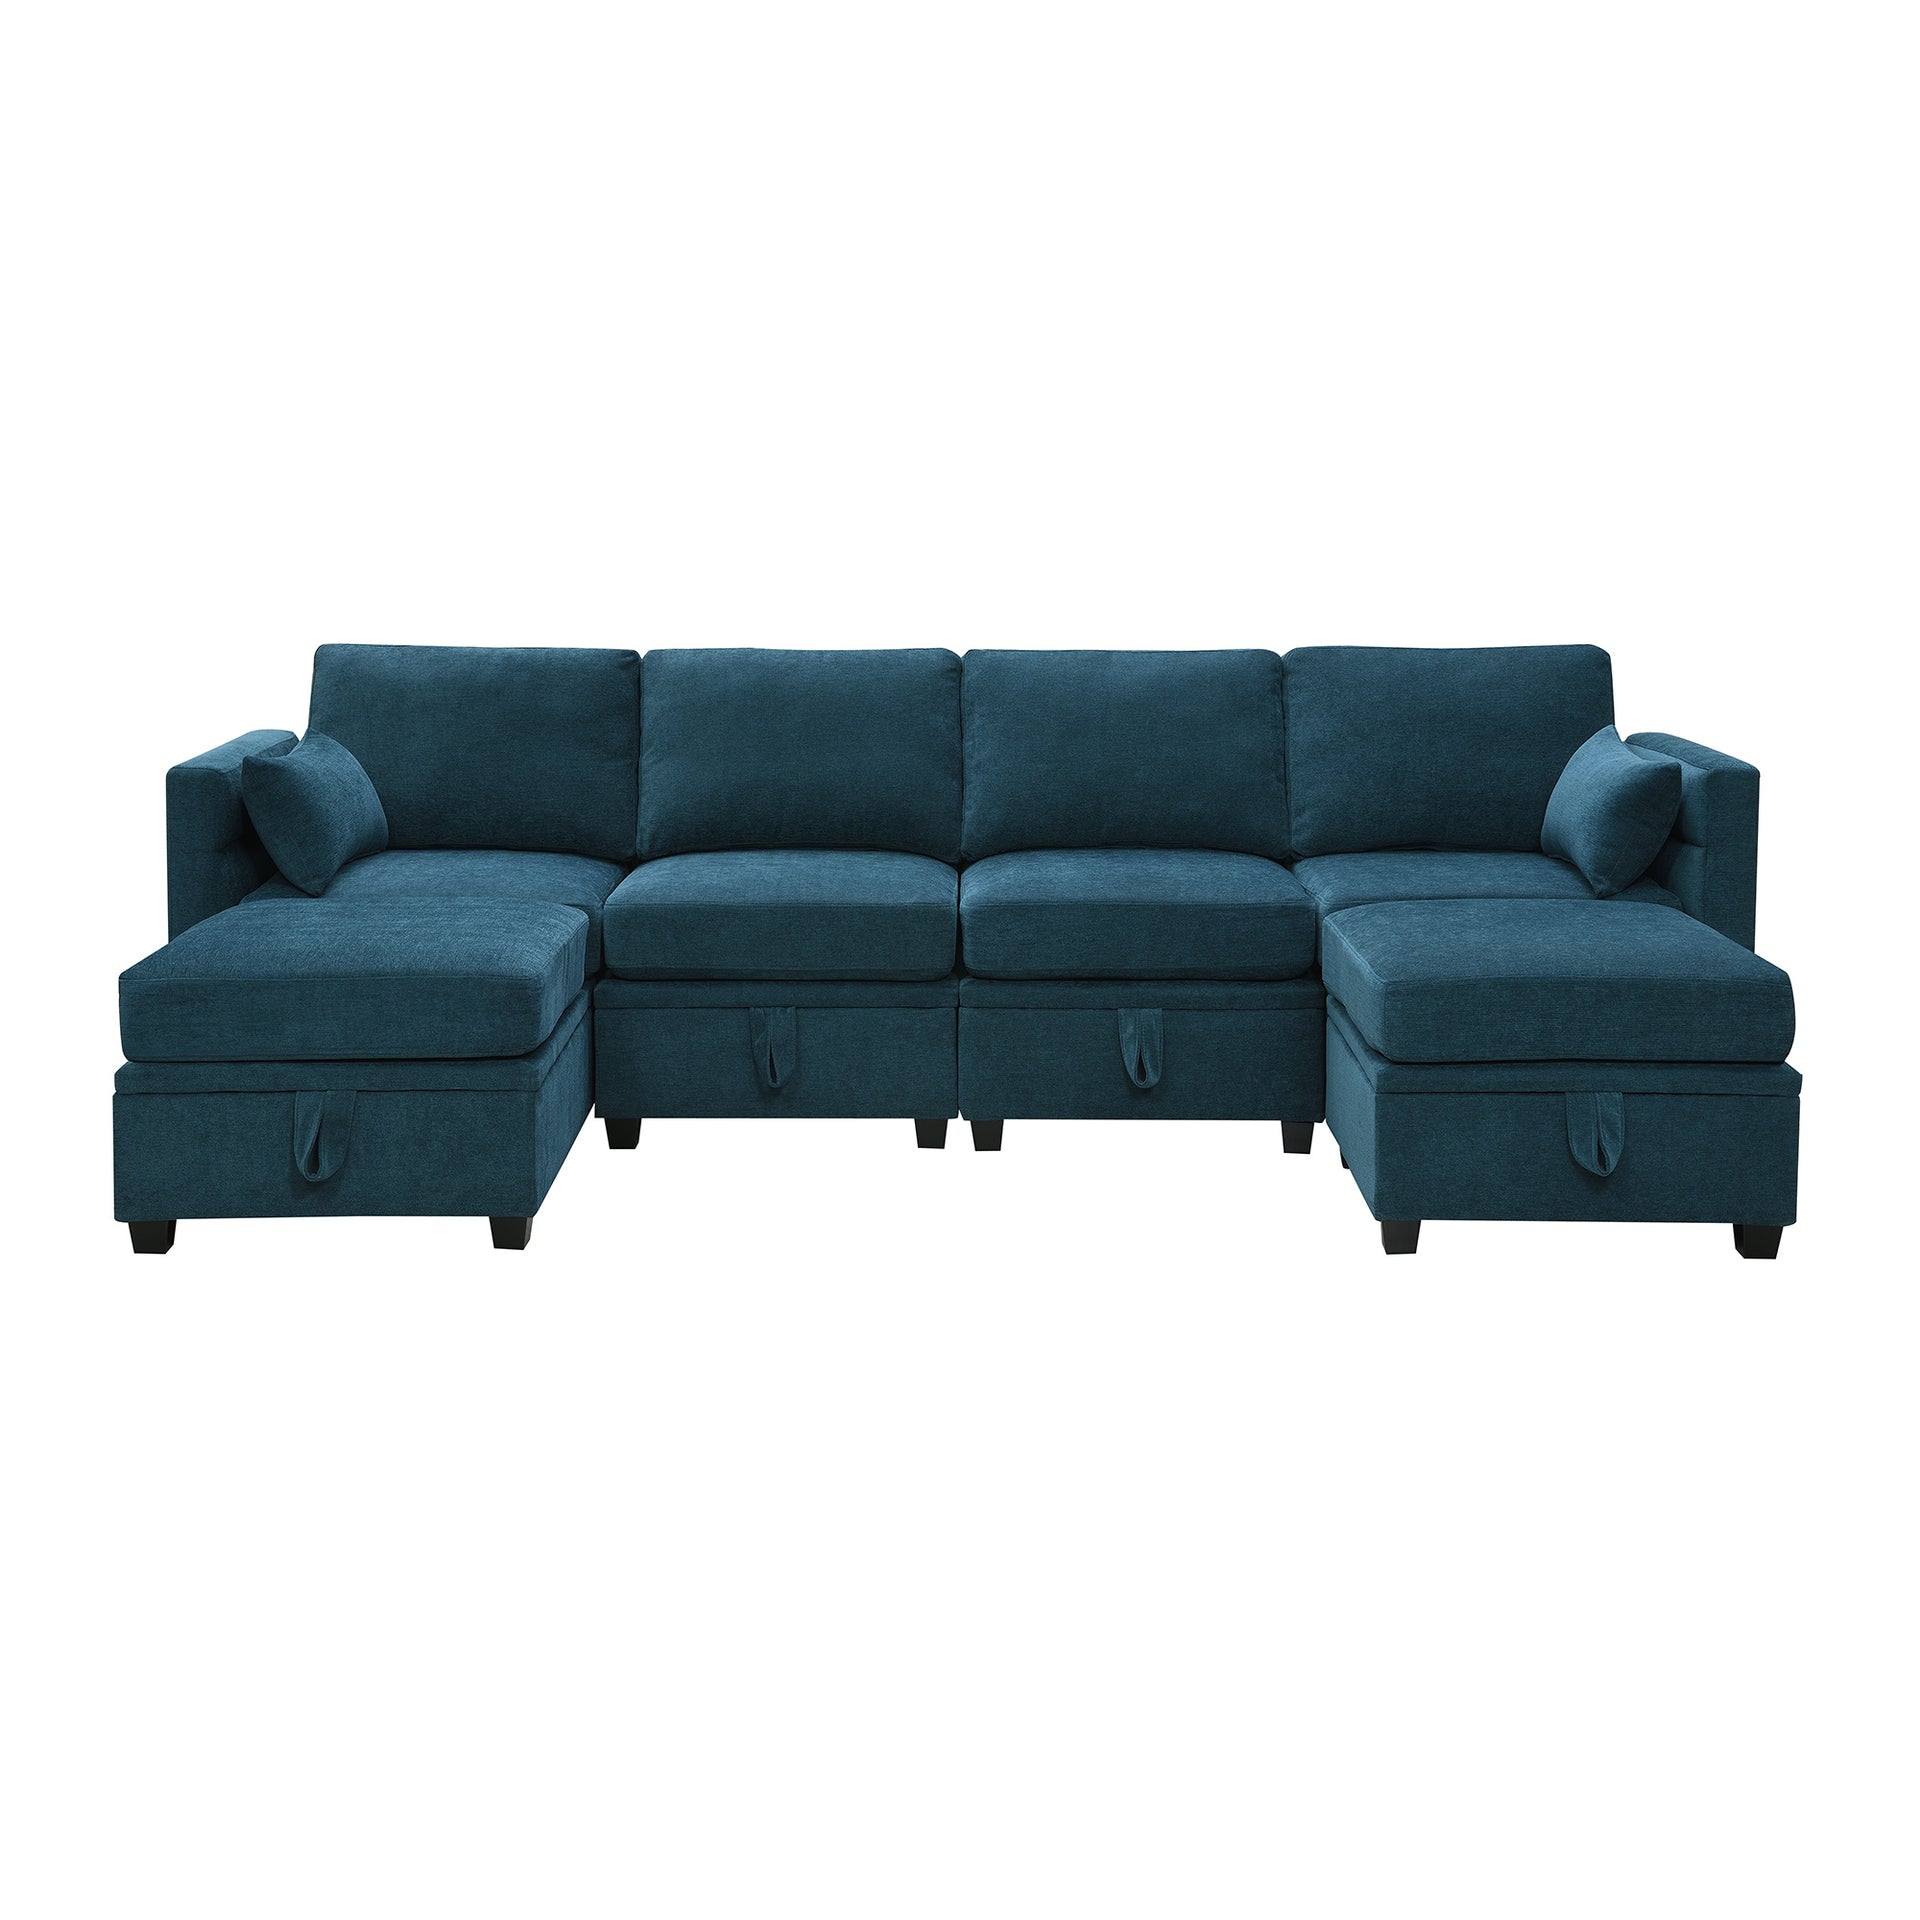 Chenille Sectional Sofa with Storage